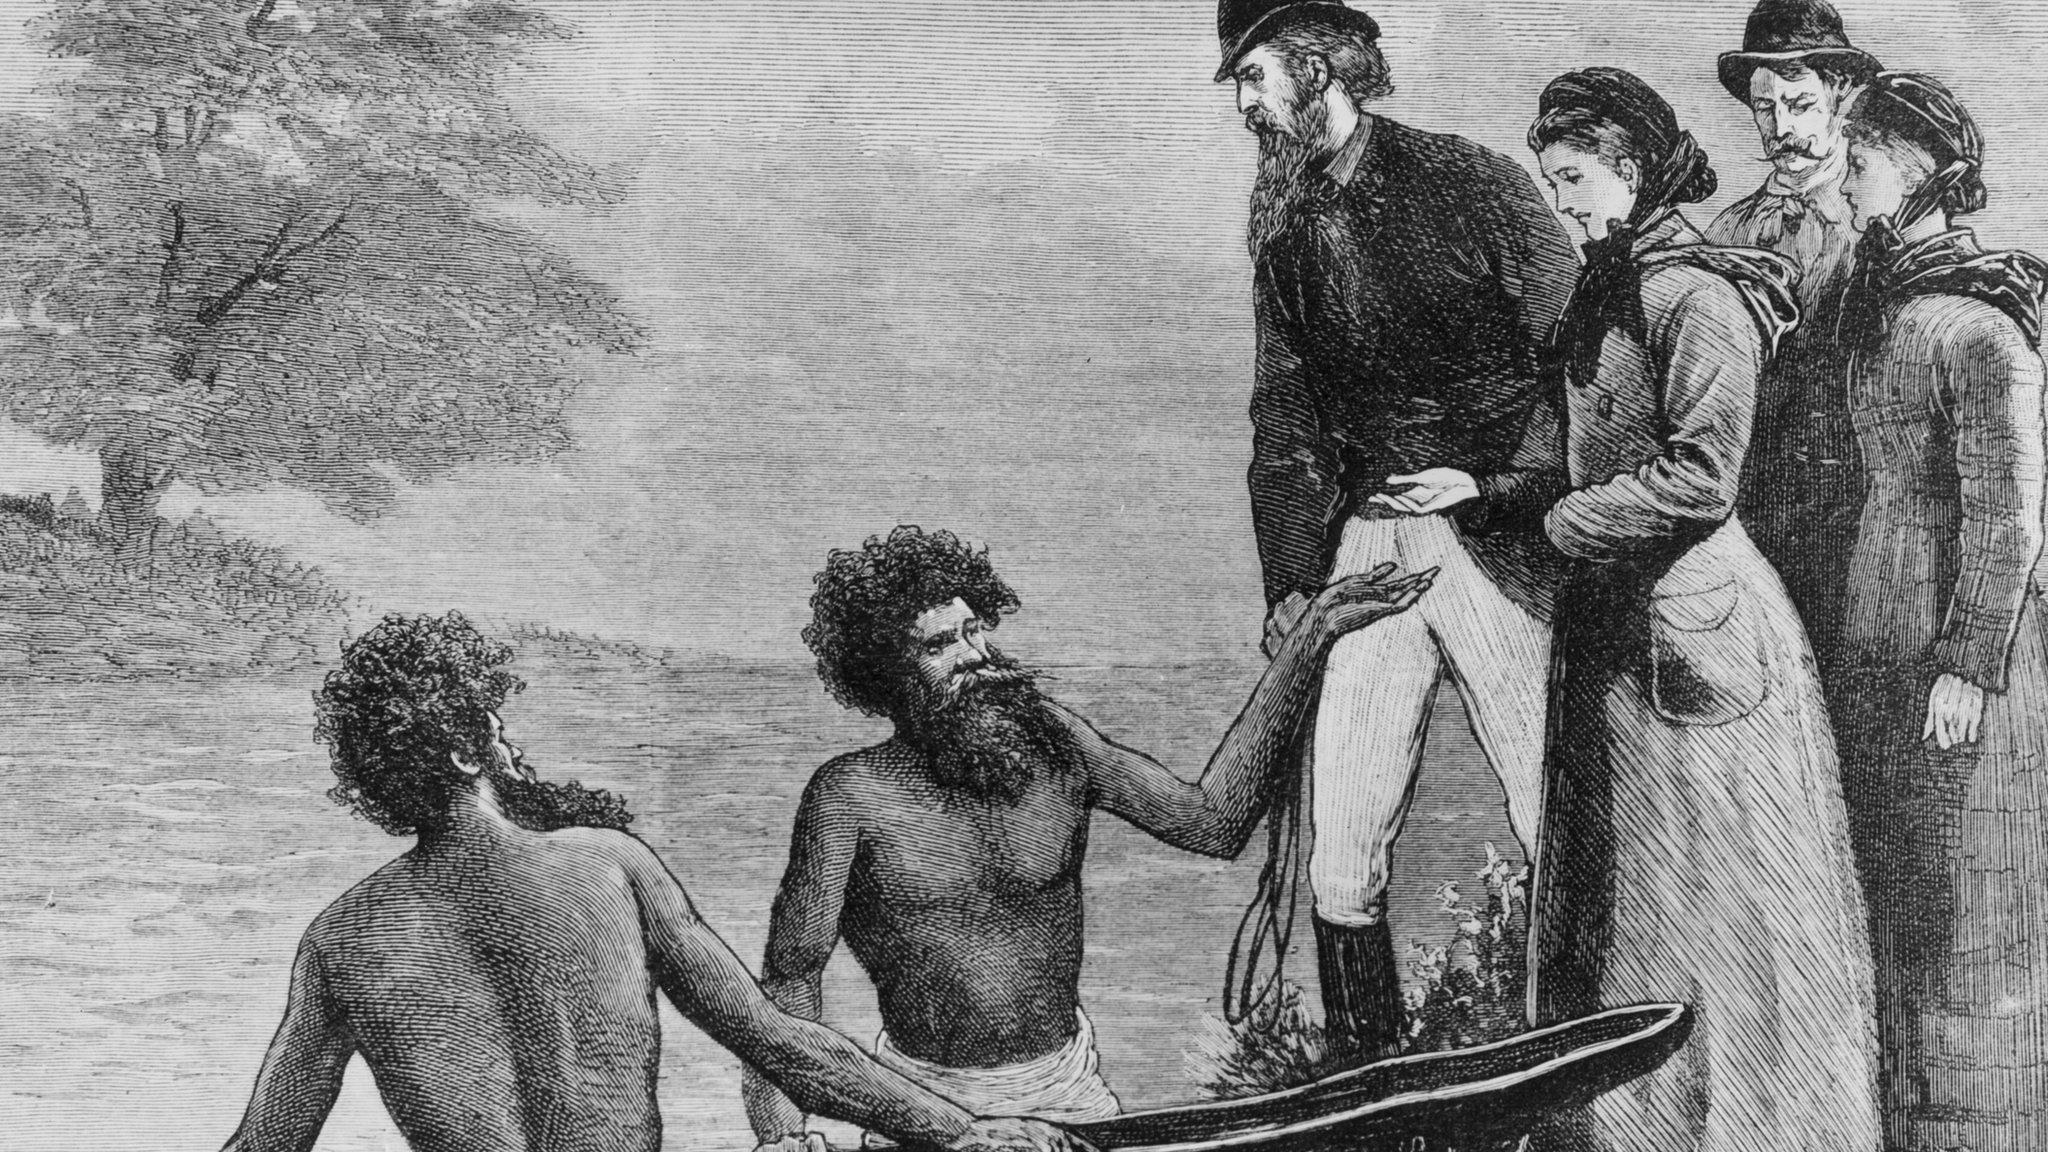 UNSWs push for the word "invaded" to replace "discovered" in terms of Australia's colonial history has been